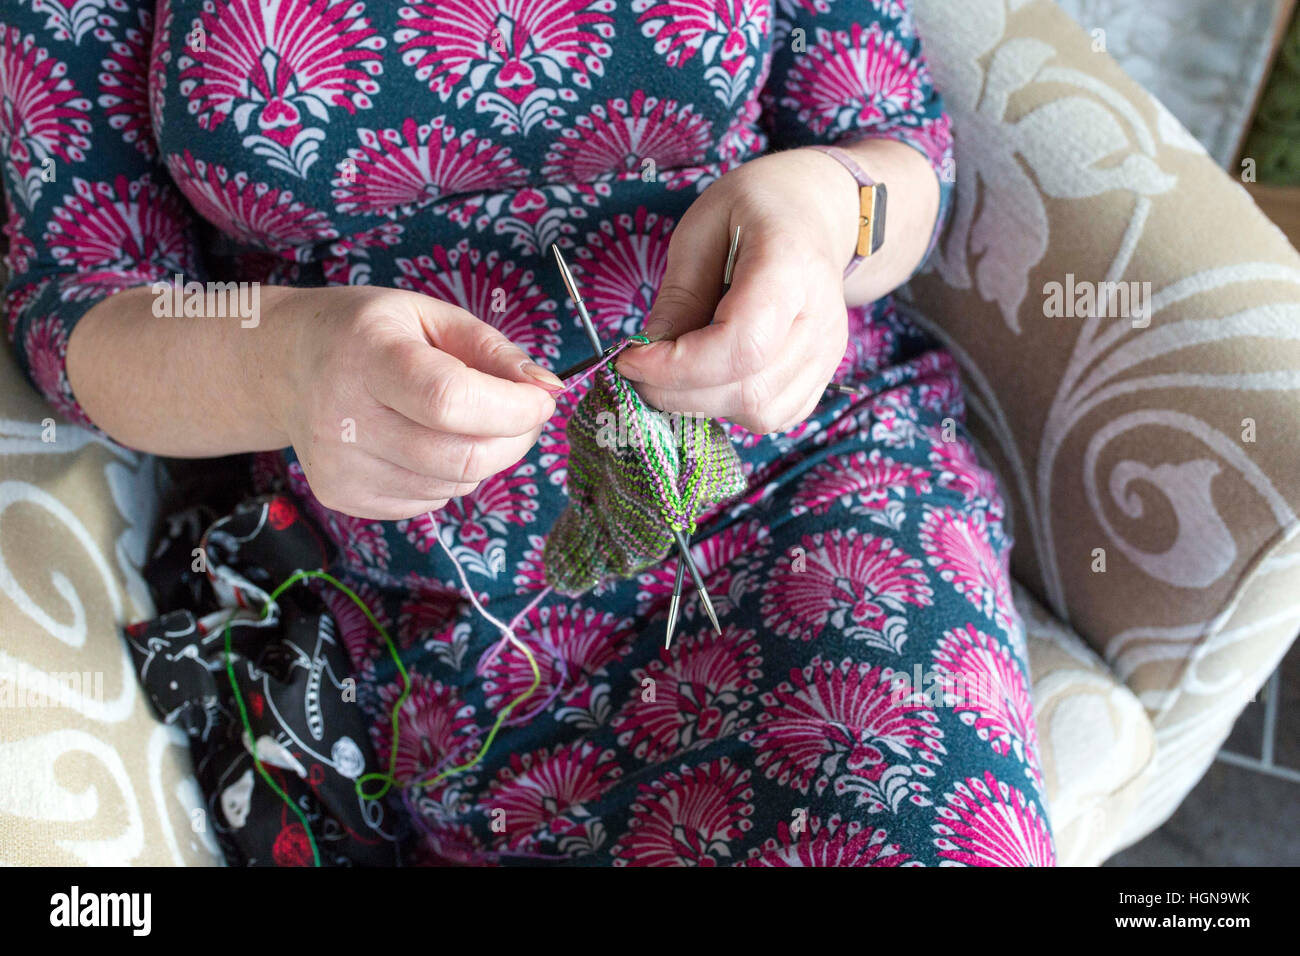 Knitting - close up of a lady's hands knitting Stock Photo